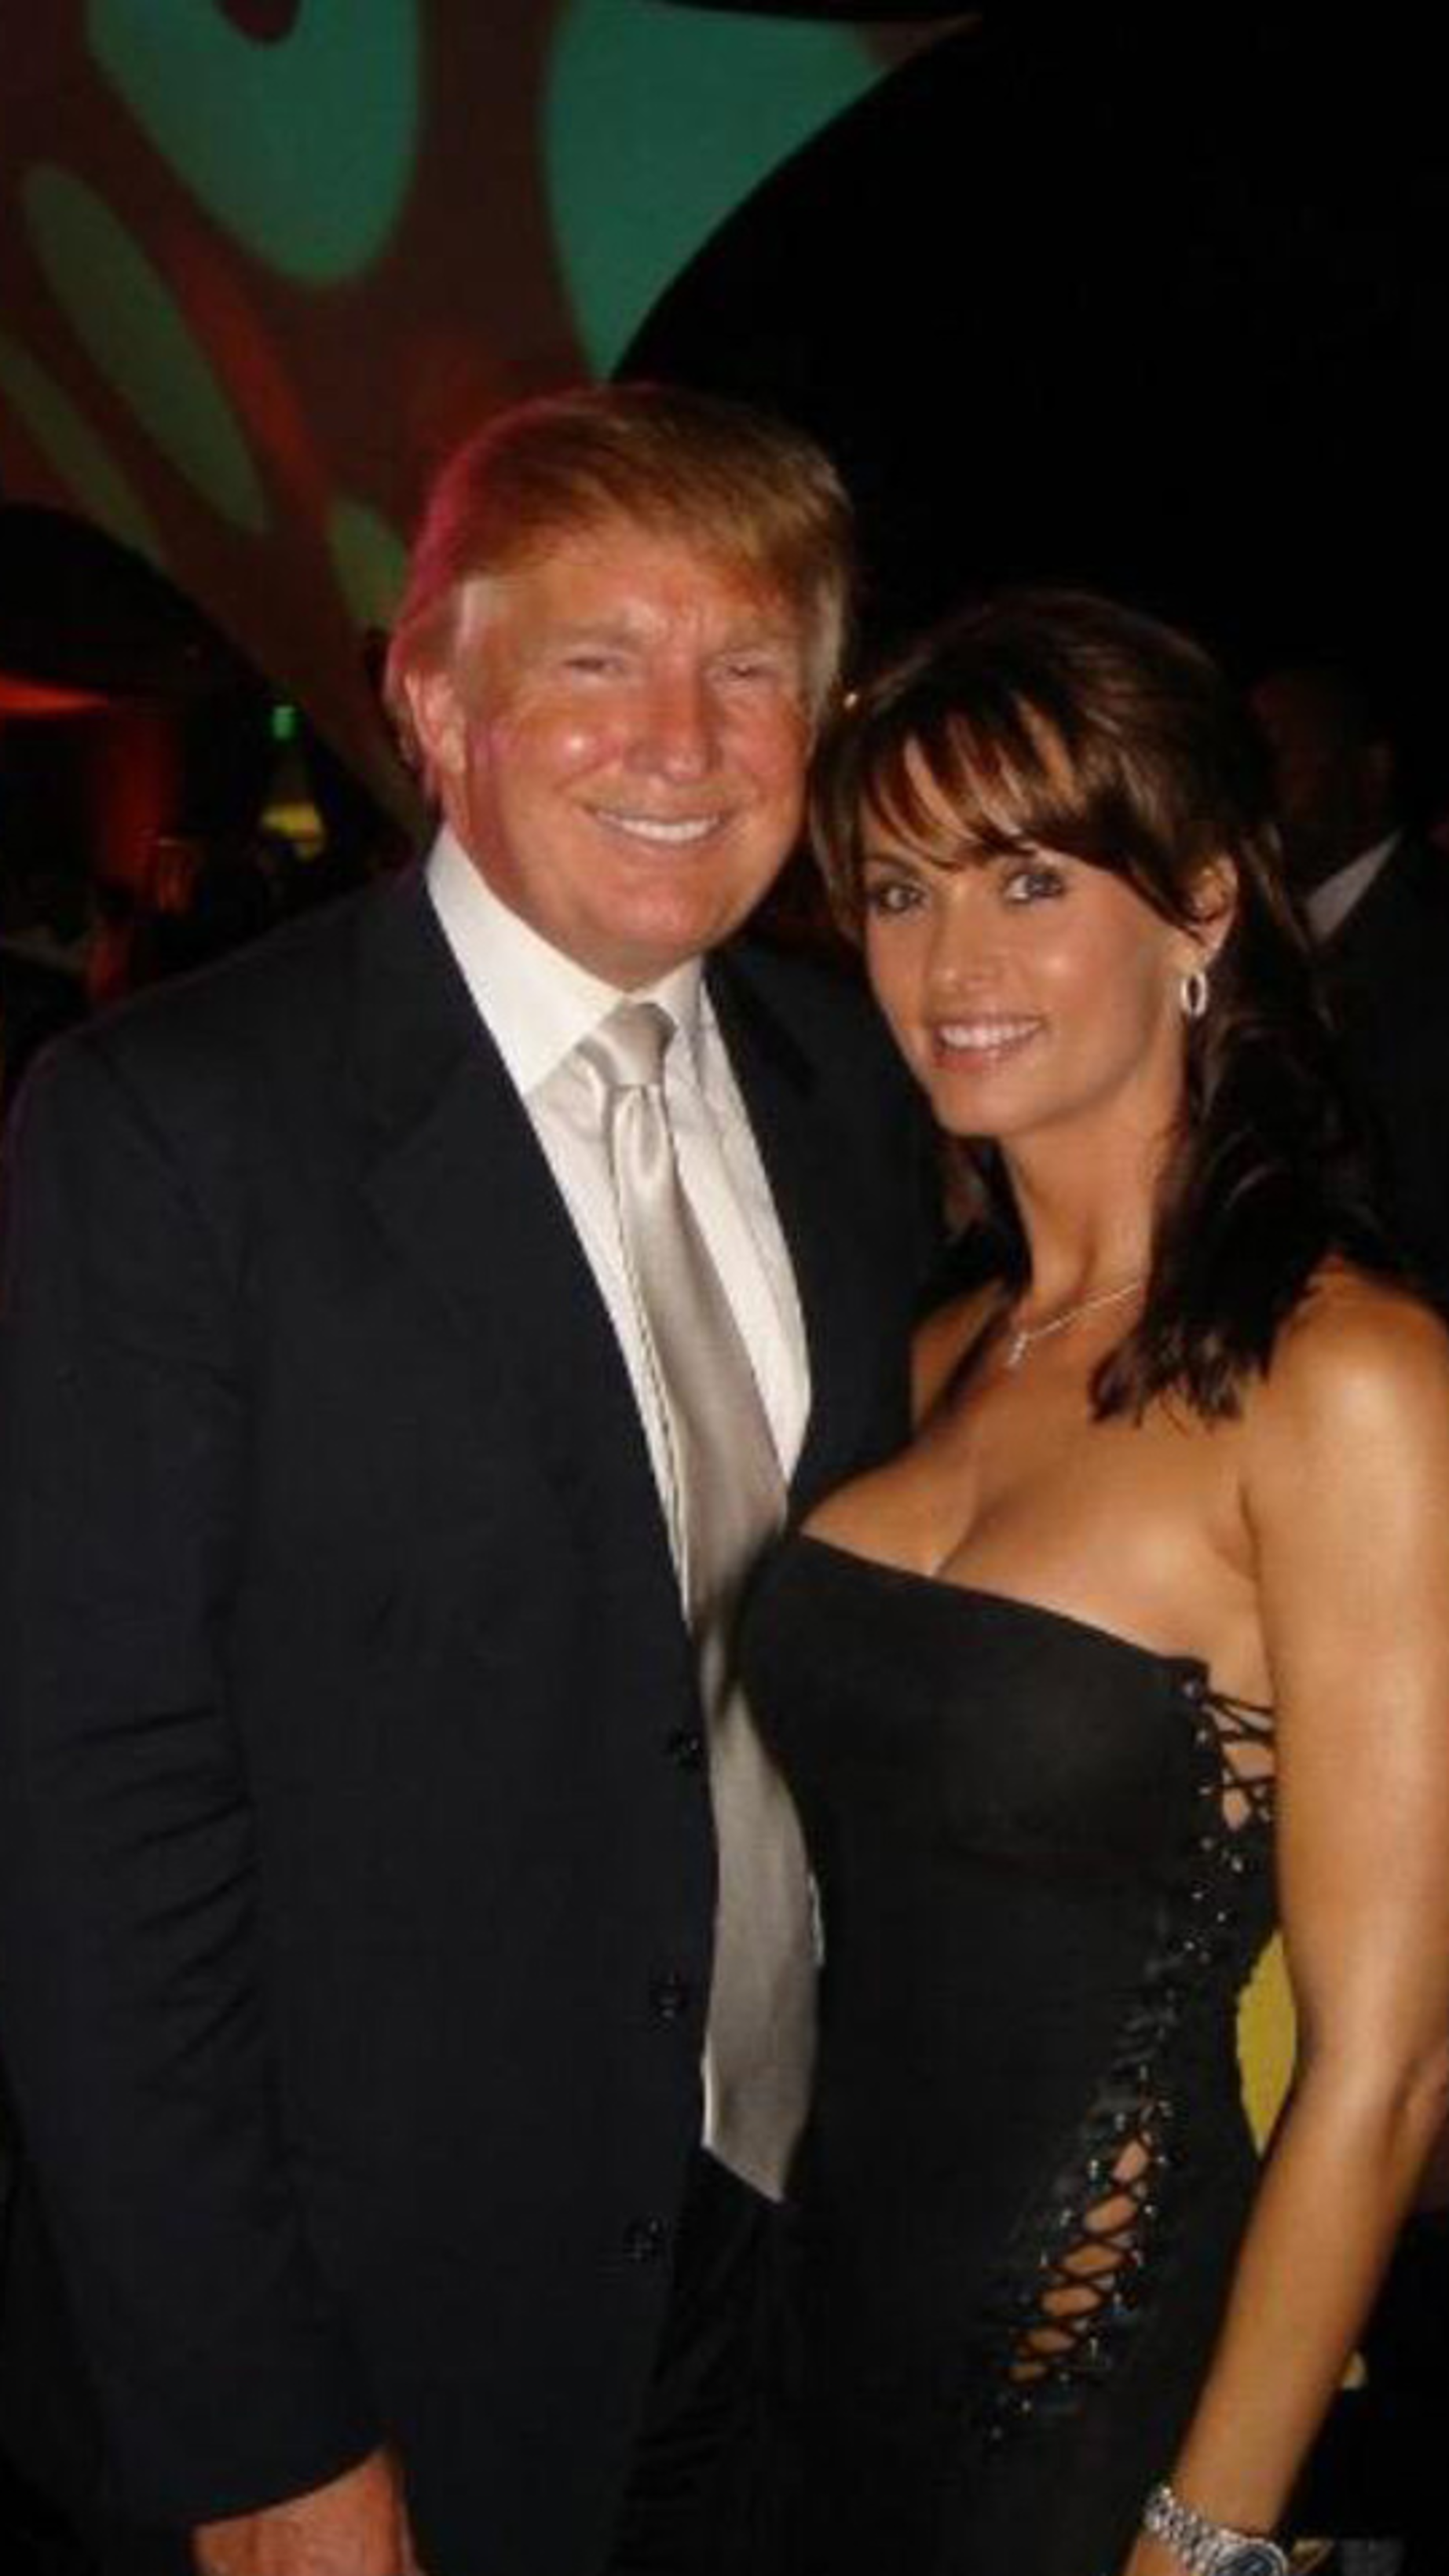 caleb glover recommends Trump Playboy Pictures